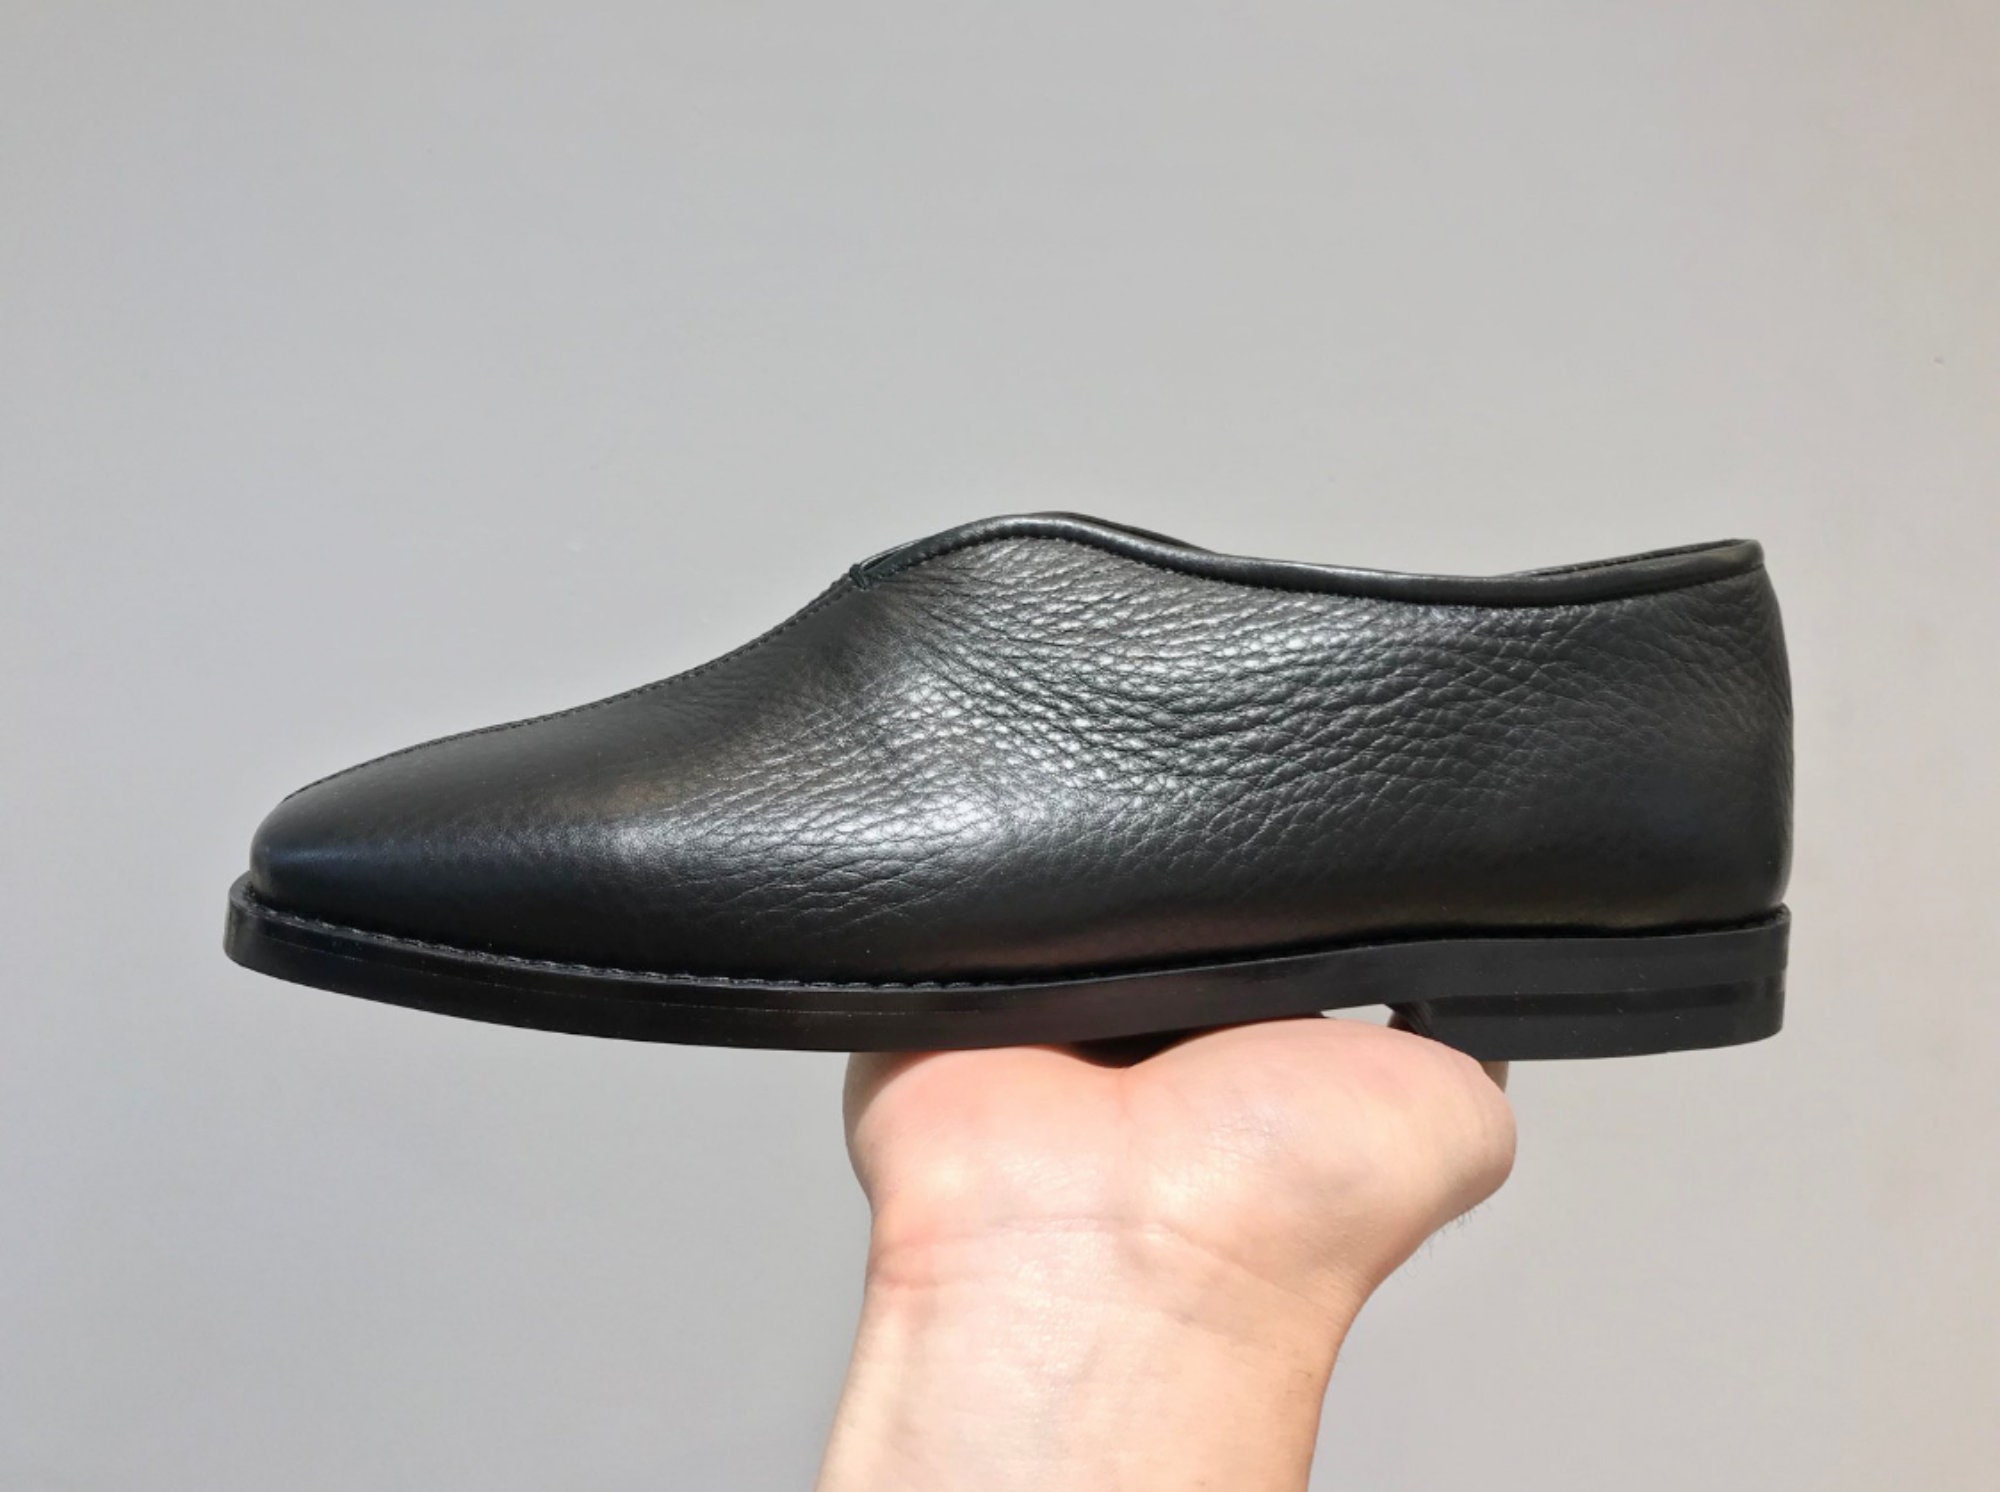 China Slippers, Manufacturers & Suppliers in China